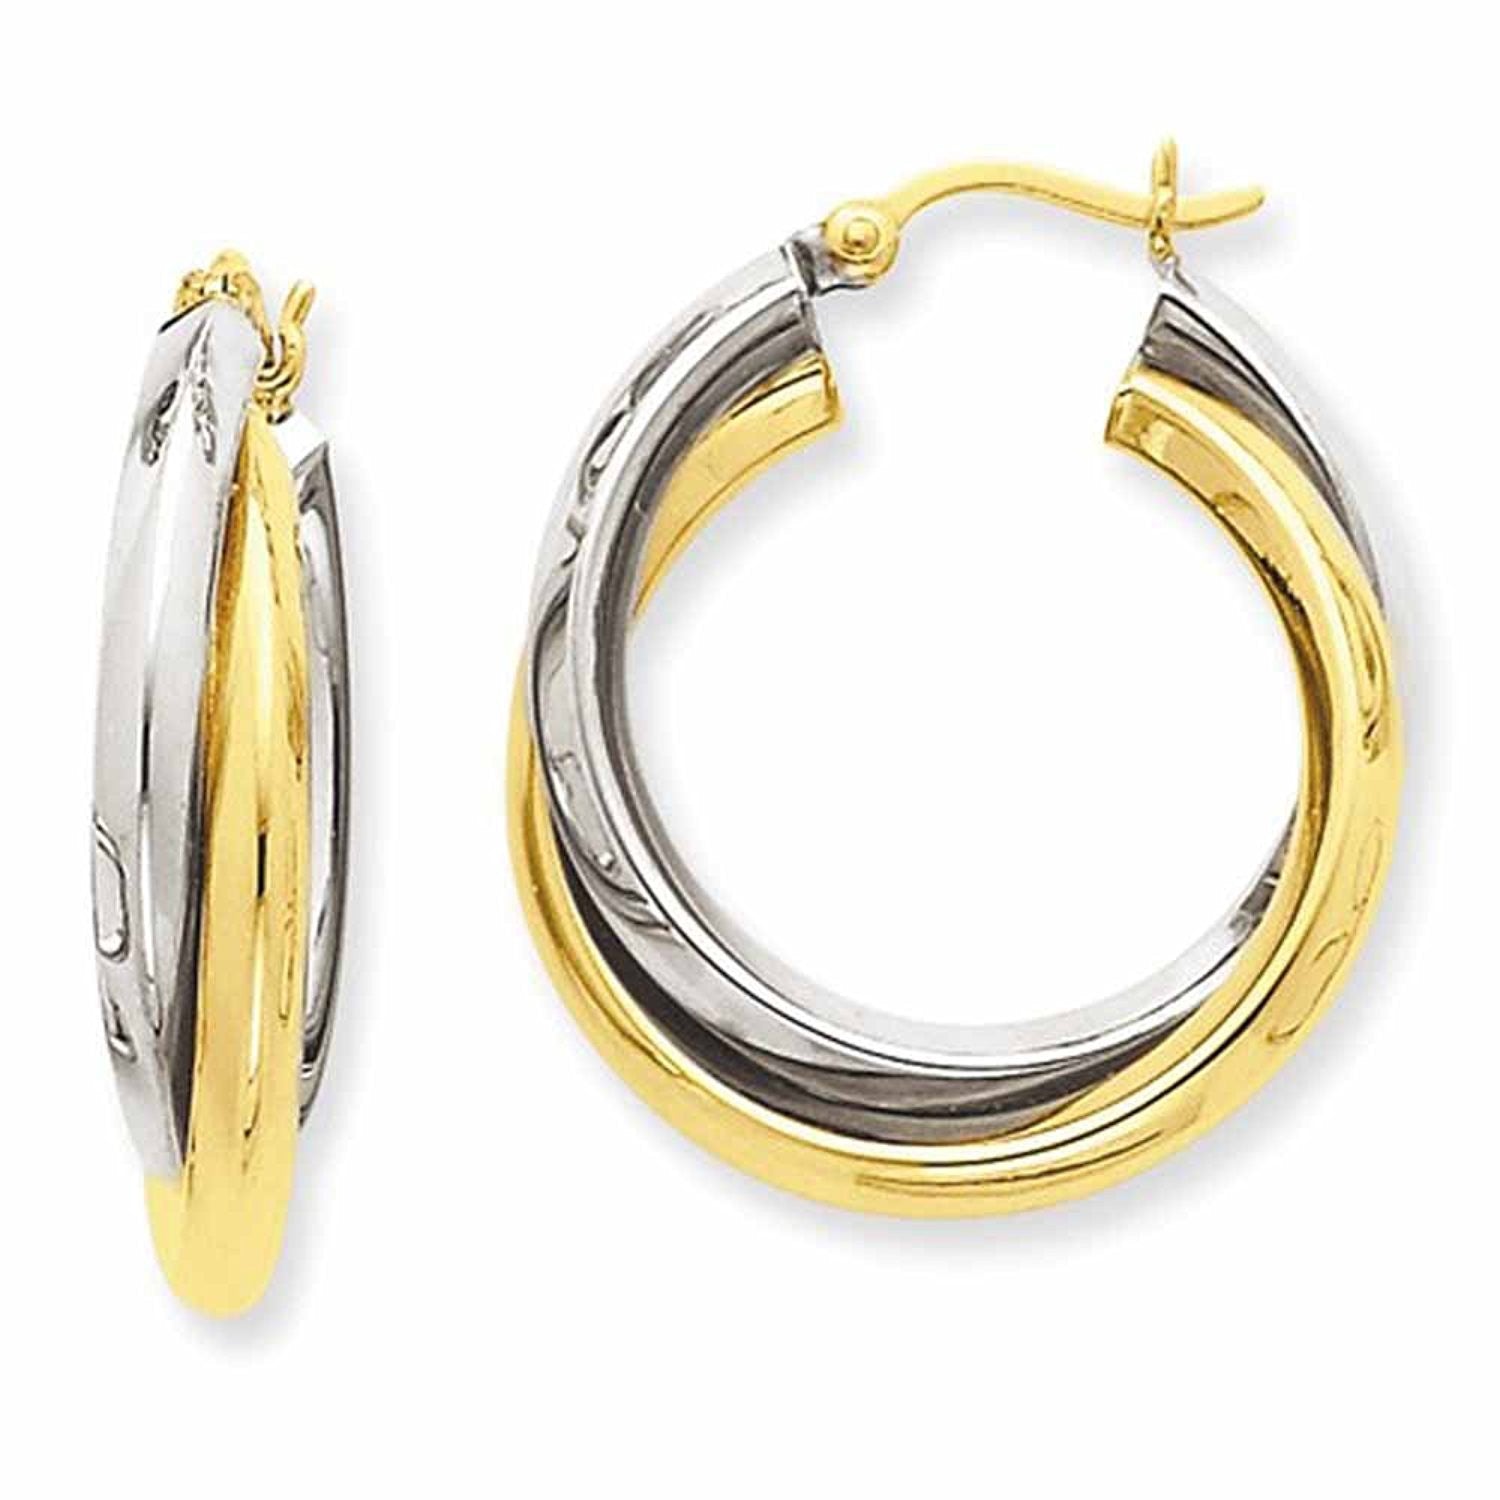 14K Gold Two Tone 24mmx23mmx6mm Modern Contemporary Double Hoop Earrings